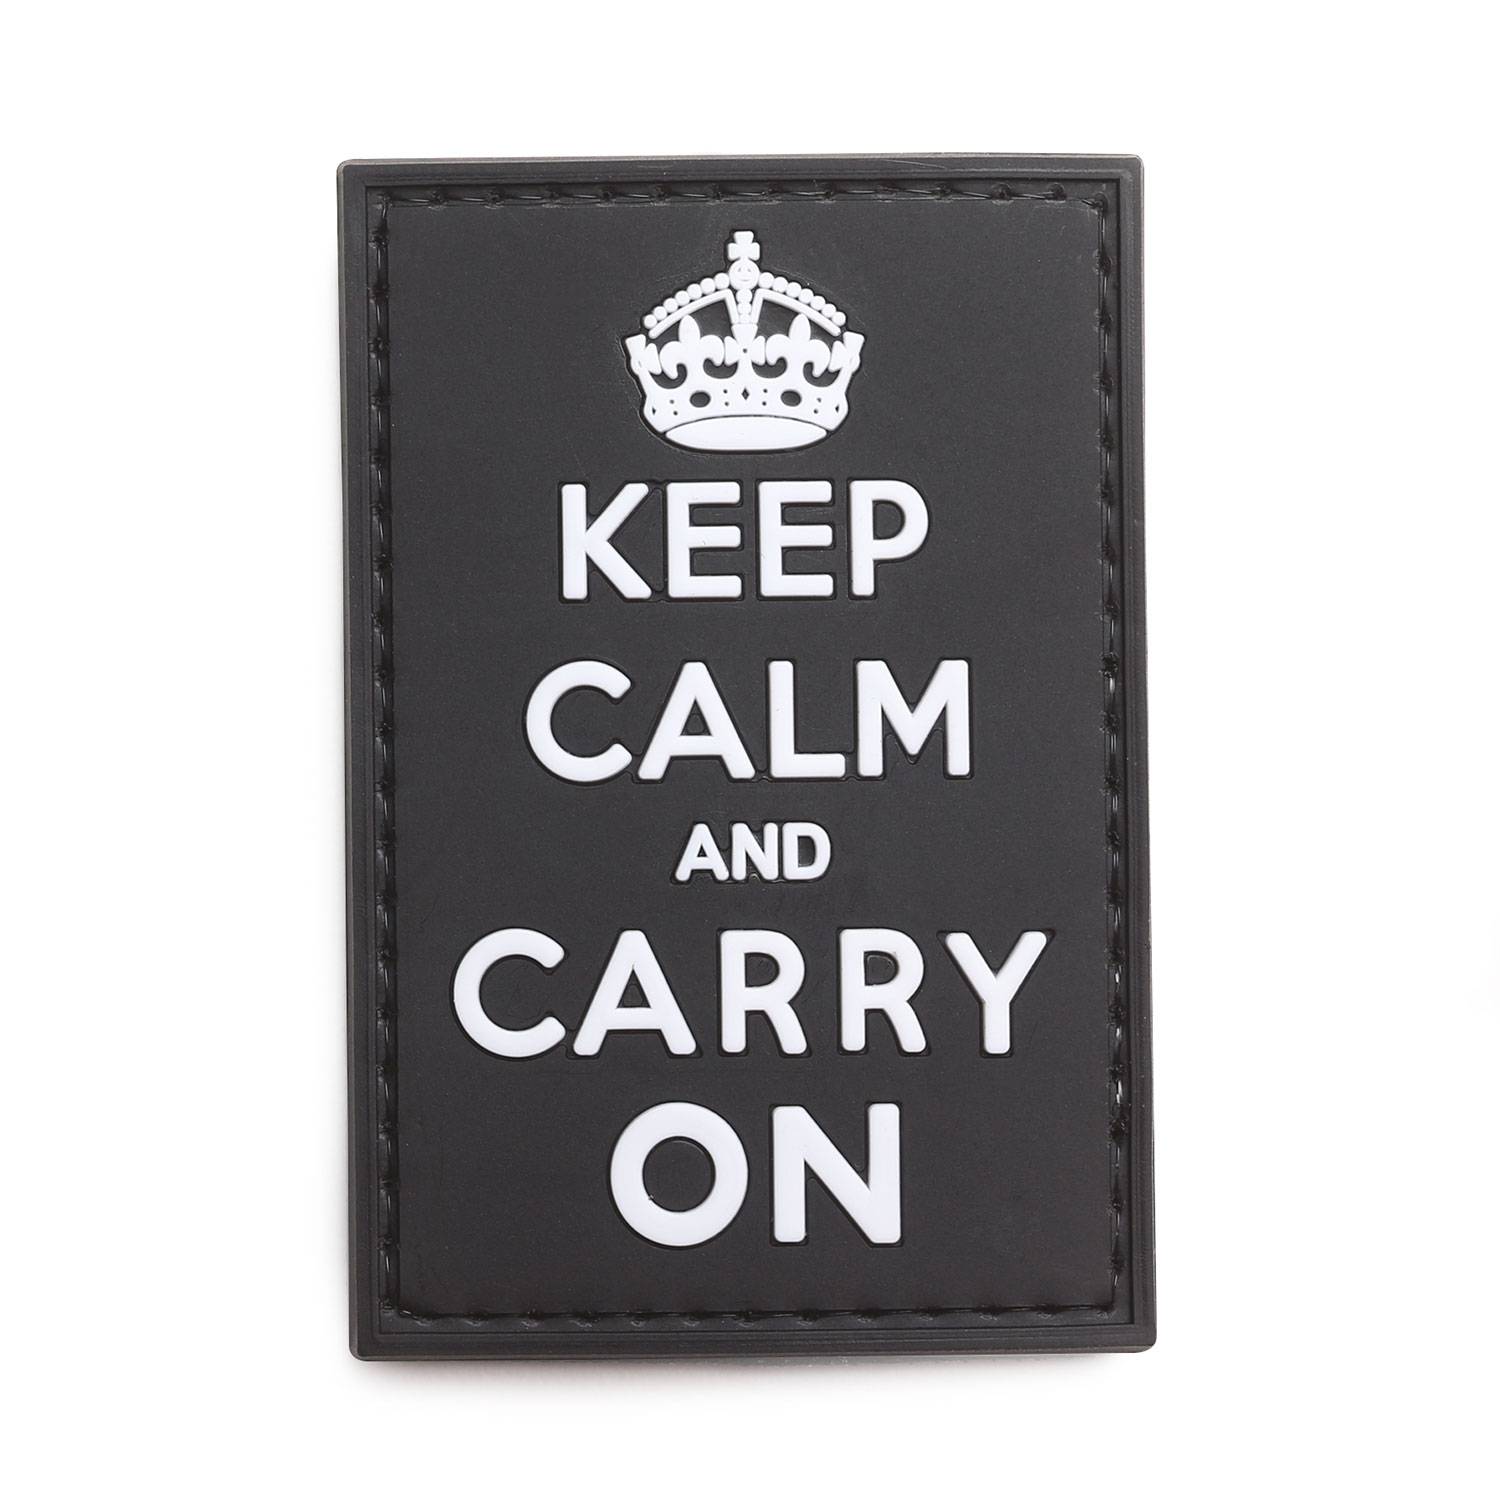 5ive Star Gear Keep Calm and Carry On Morale Patch